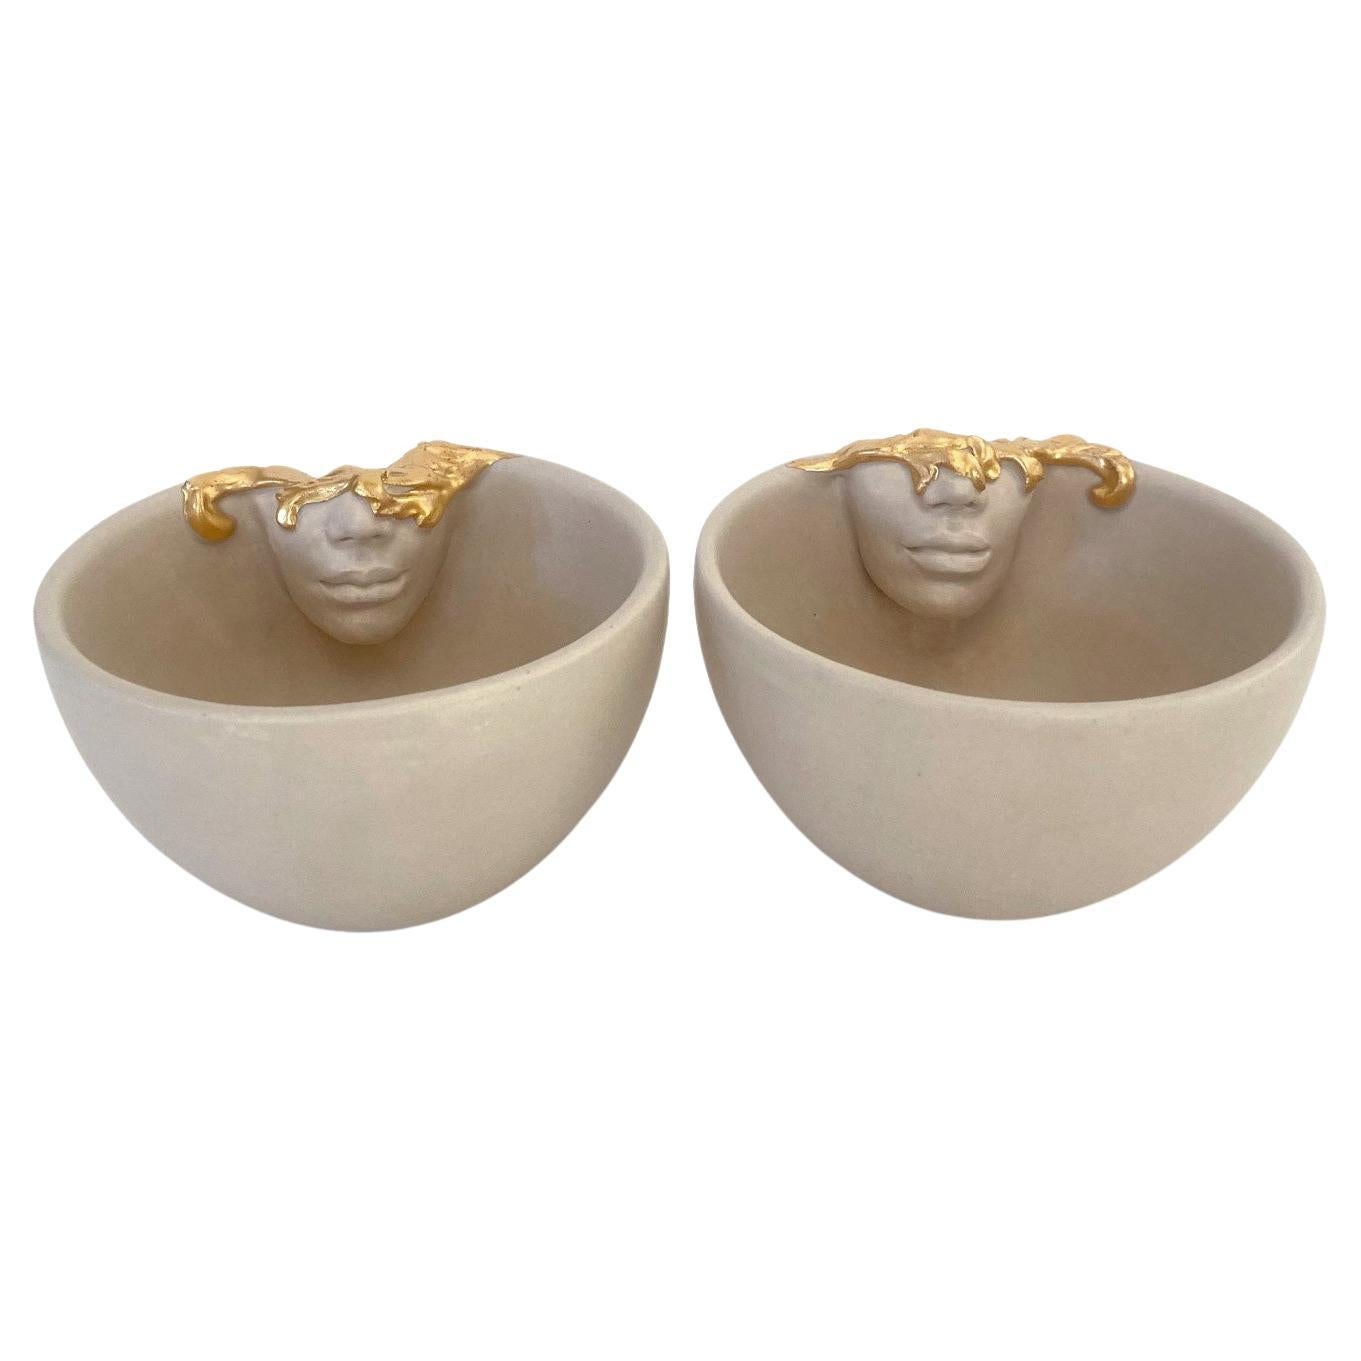 12k Gold Lustered Ceramic Cups Set of 2 by Hulya Sozer, Face Inside Serie, Beige For Sale